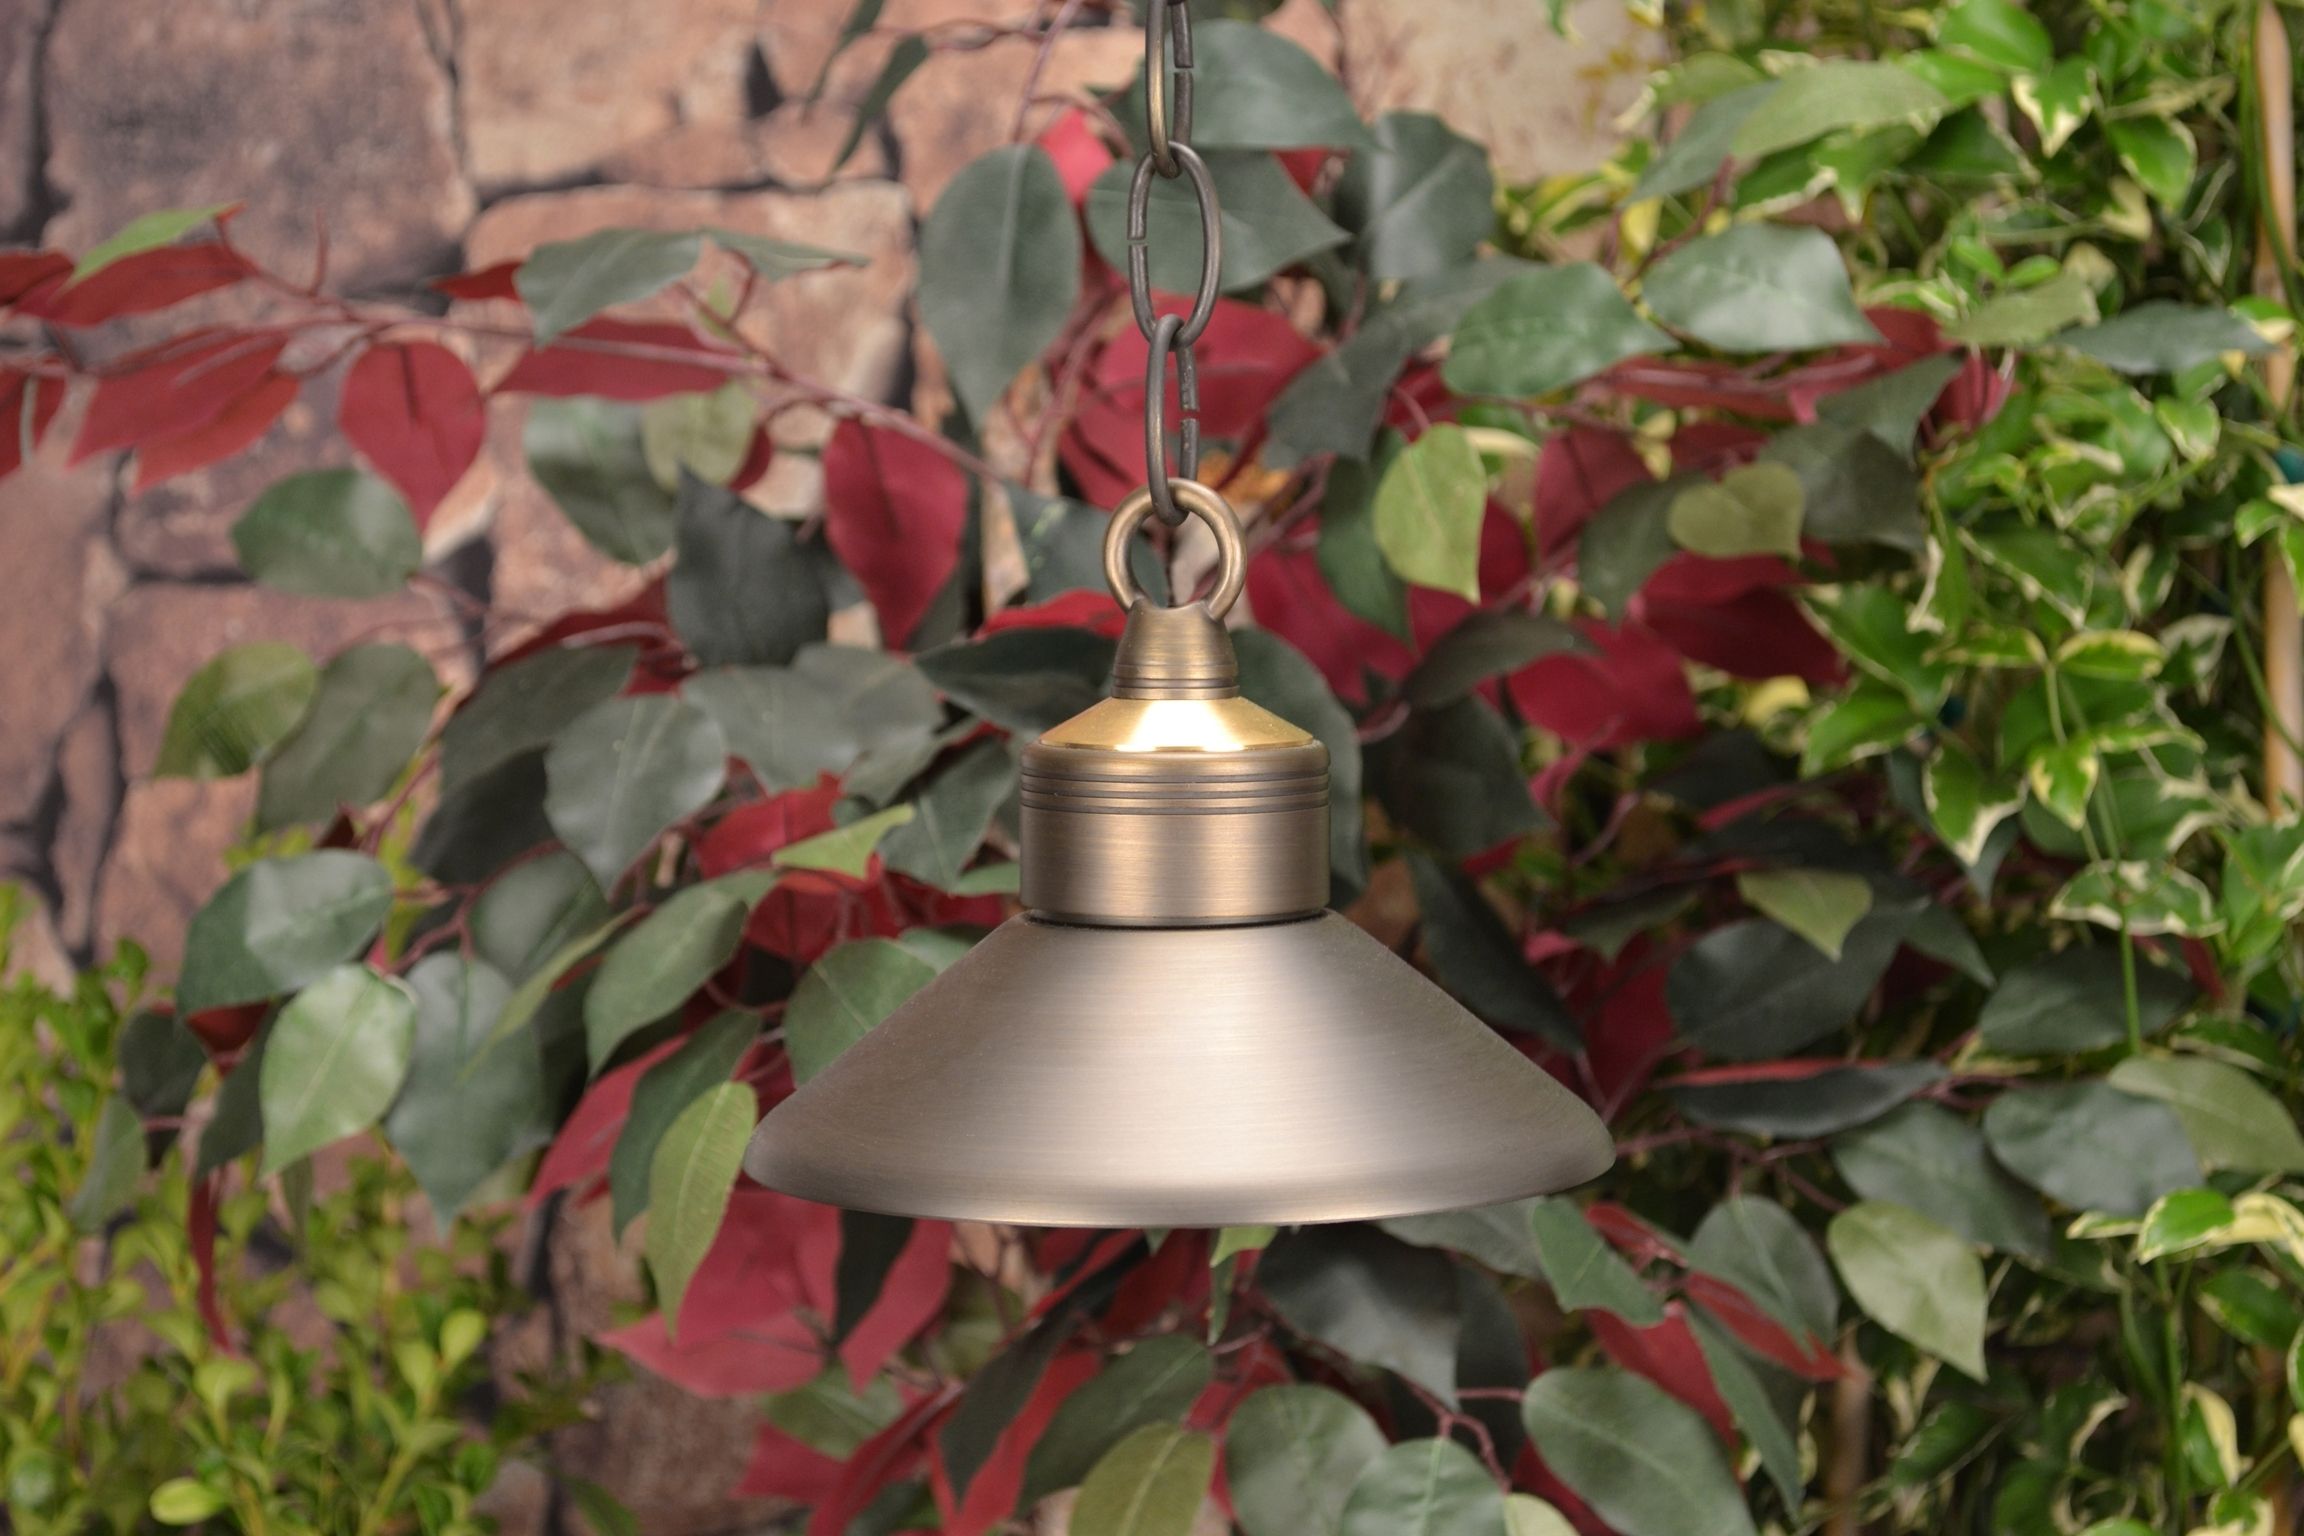 Observerunique Lighting Systems – 12 Volt Brass Hanging Light Pertaining To 12 Volt Outdoor Hanging Lights (View 1 of 15)